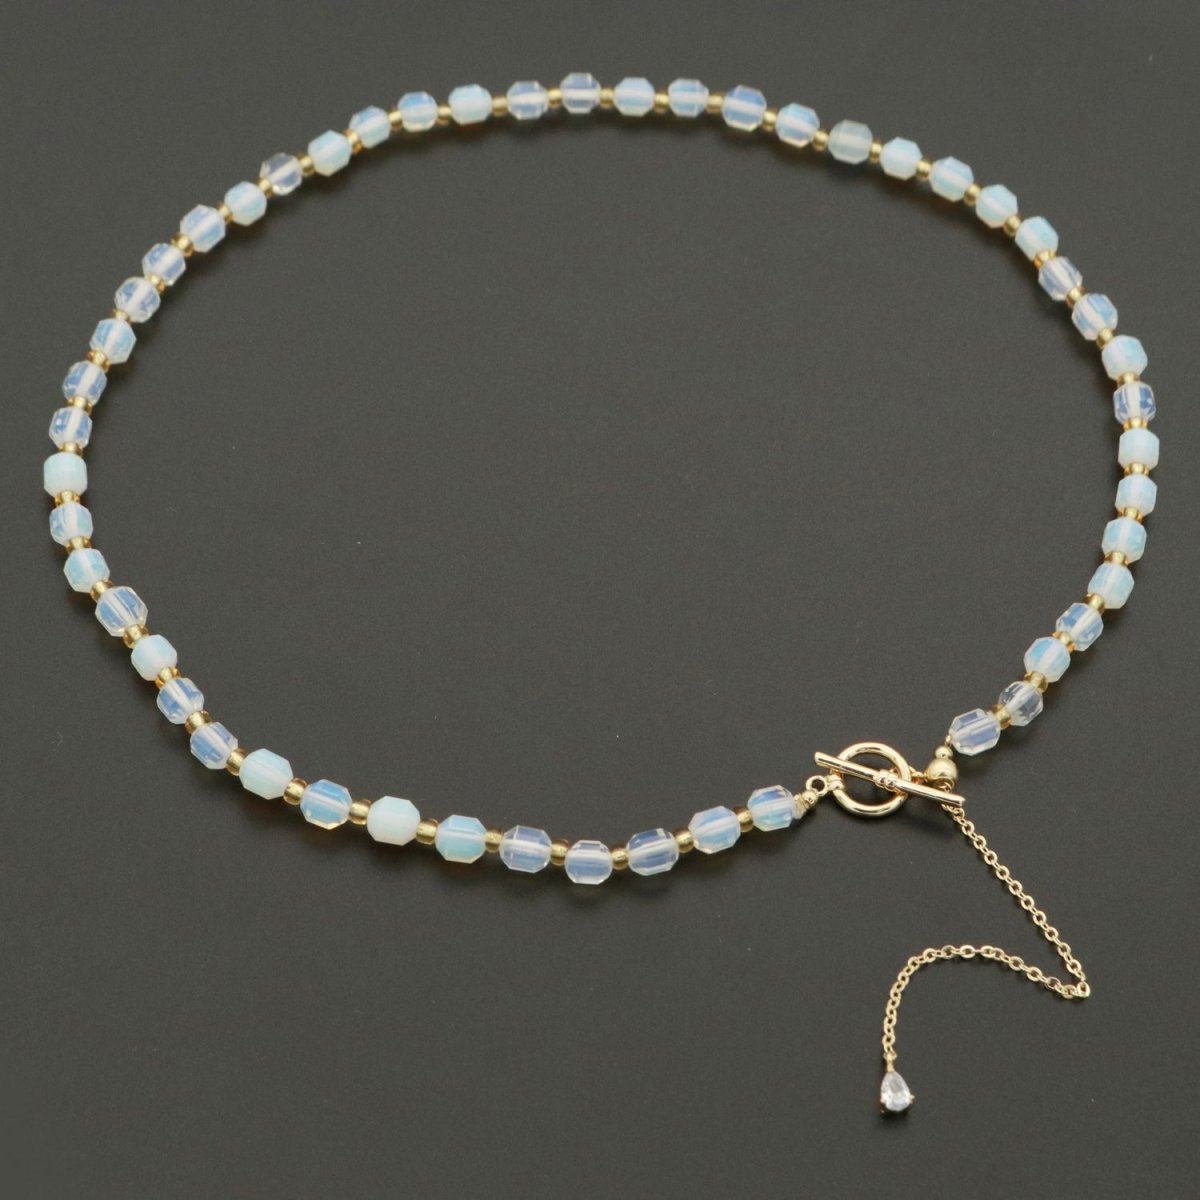 White Agate Bead Necklace 5.6mm Beads Mini White Agate stone Bead Necklace 16.5" necklace with Toggle Clasp | WA-252 Clearance Pricing - DLUXCA